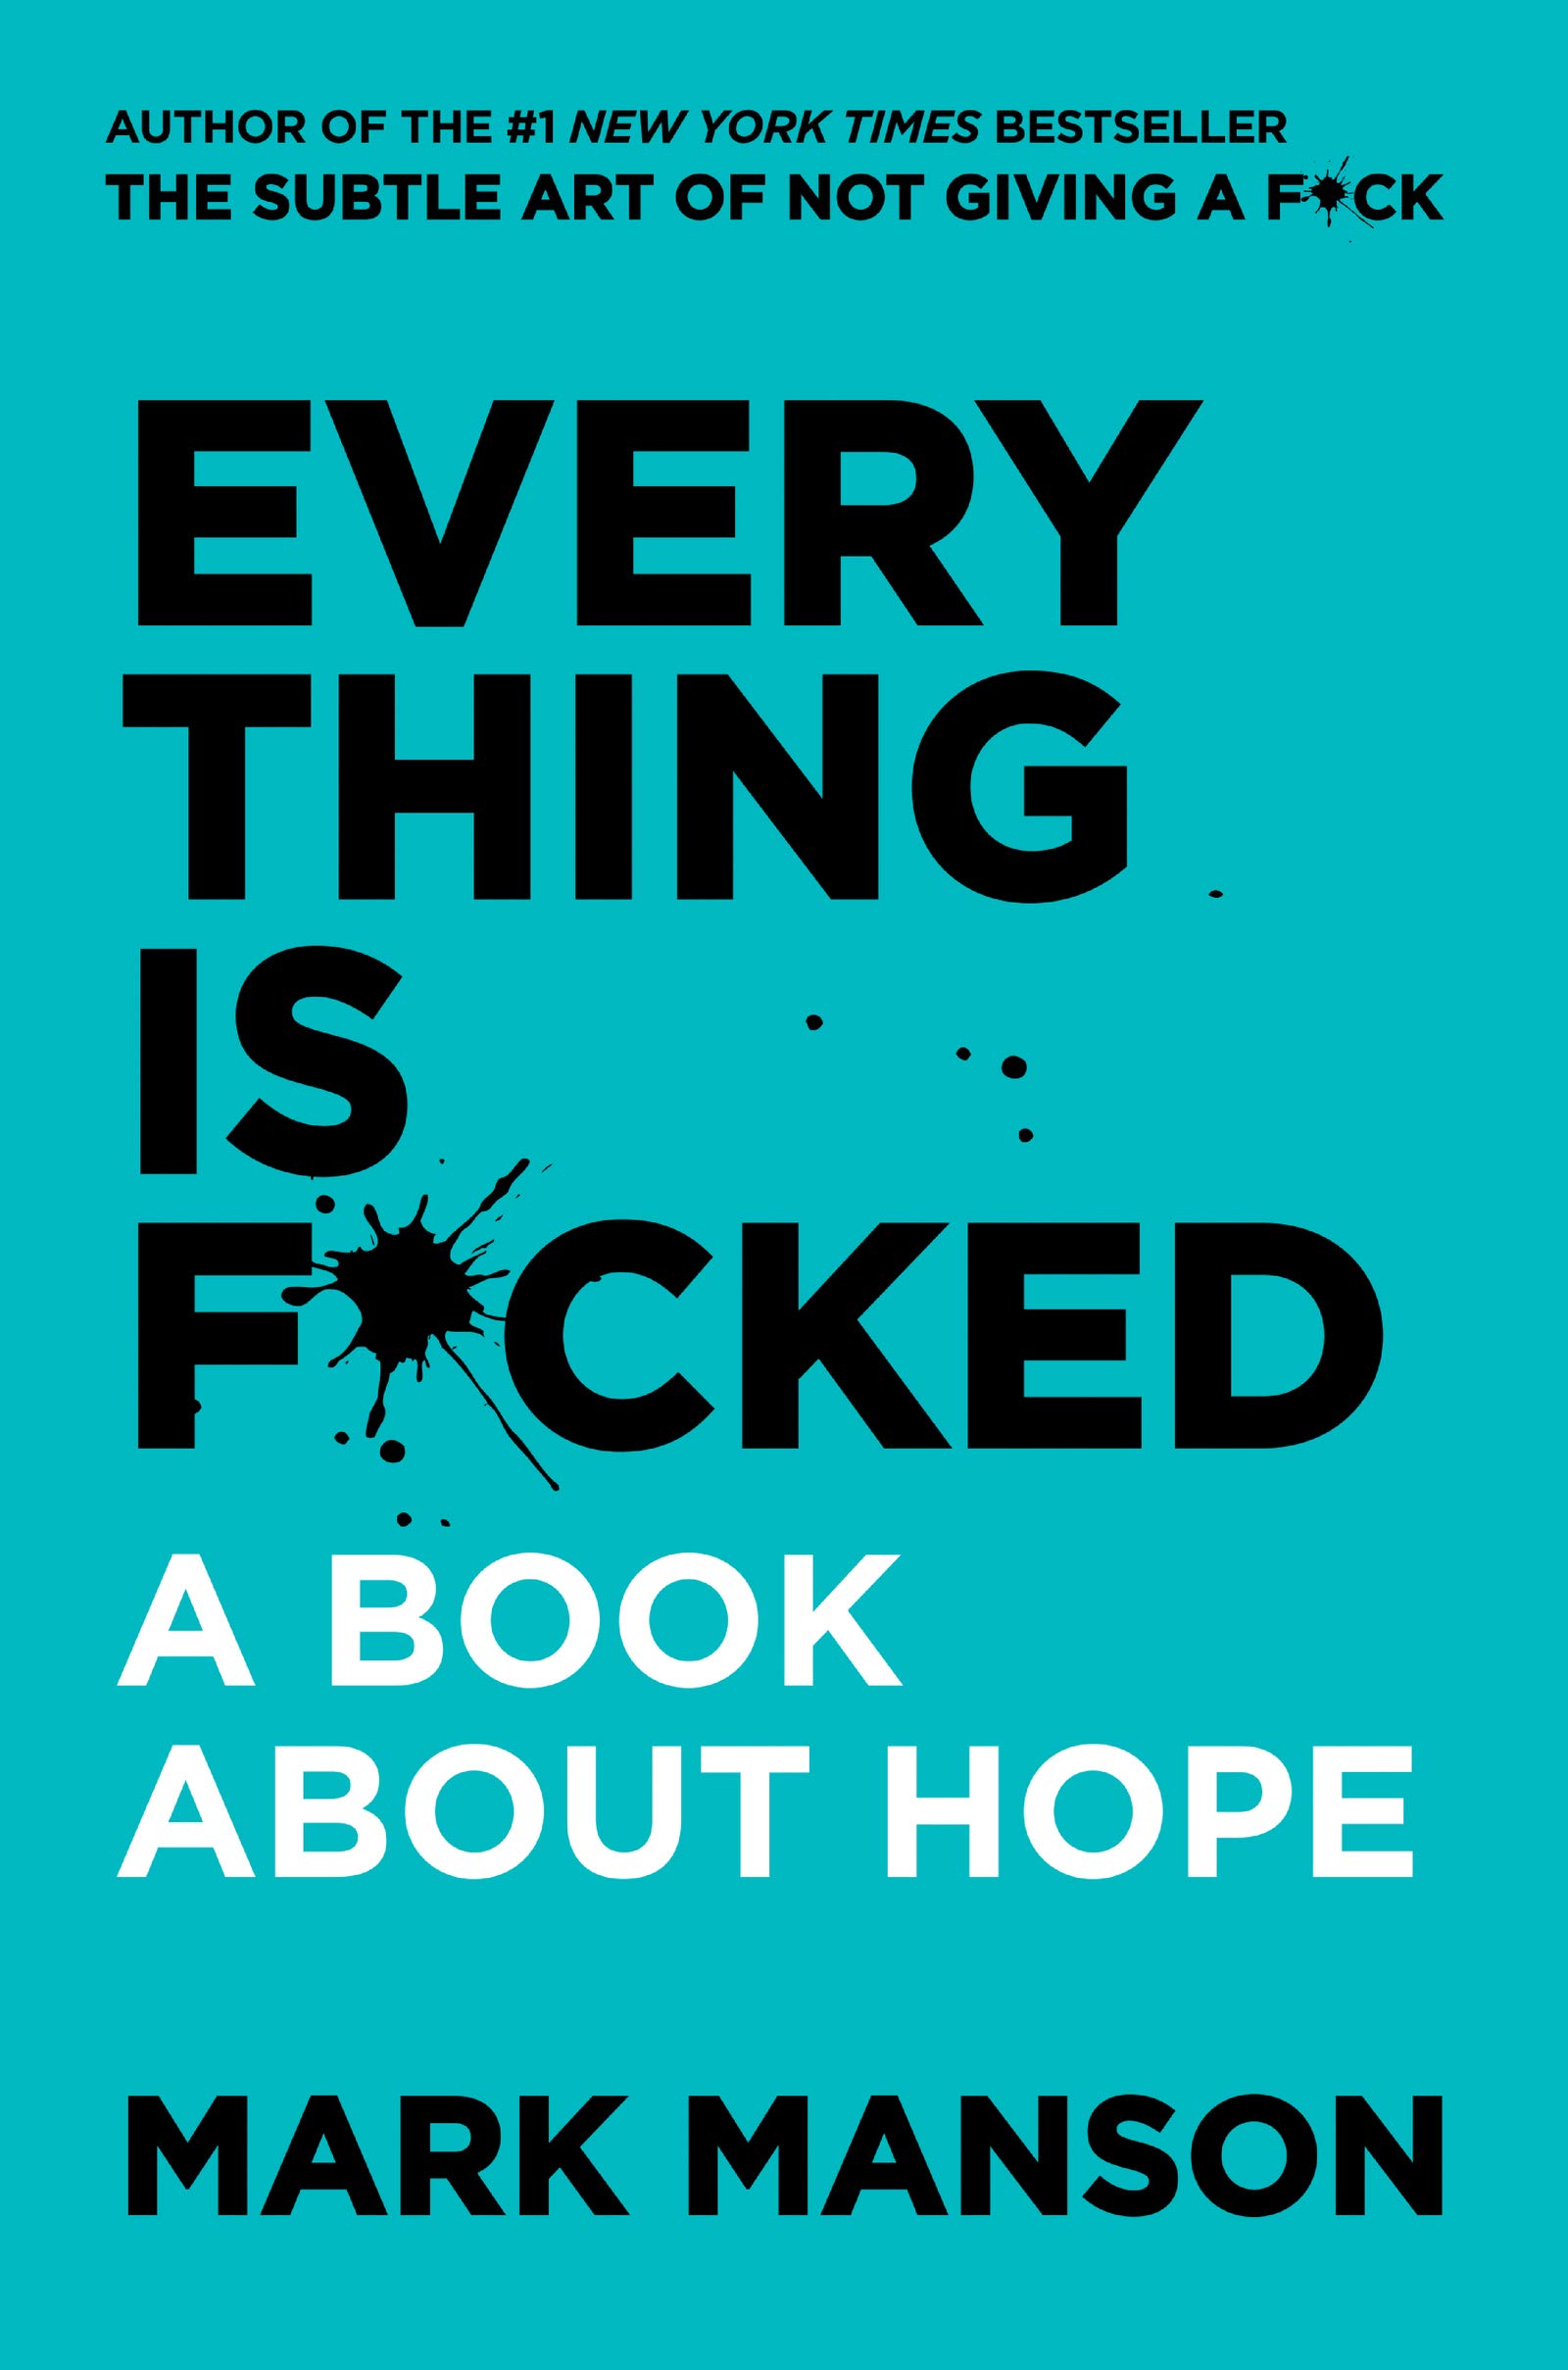 EVERY THING IS F*CKED - Mark Manson